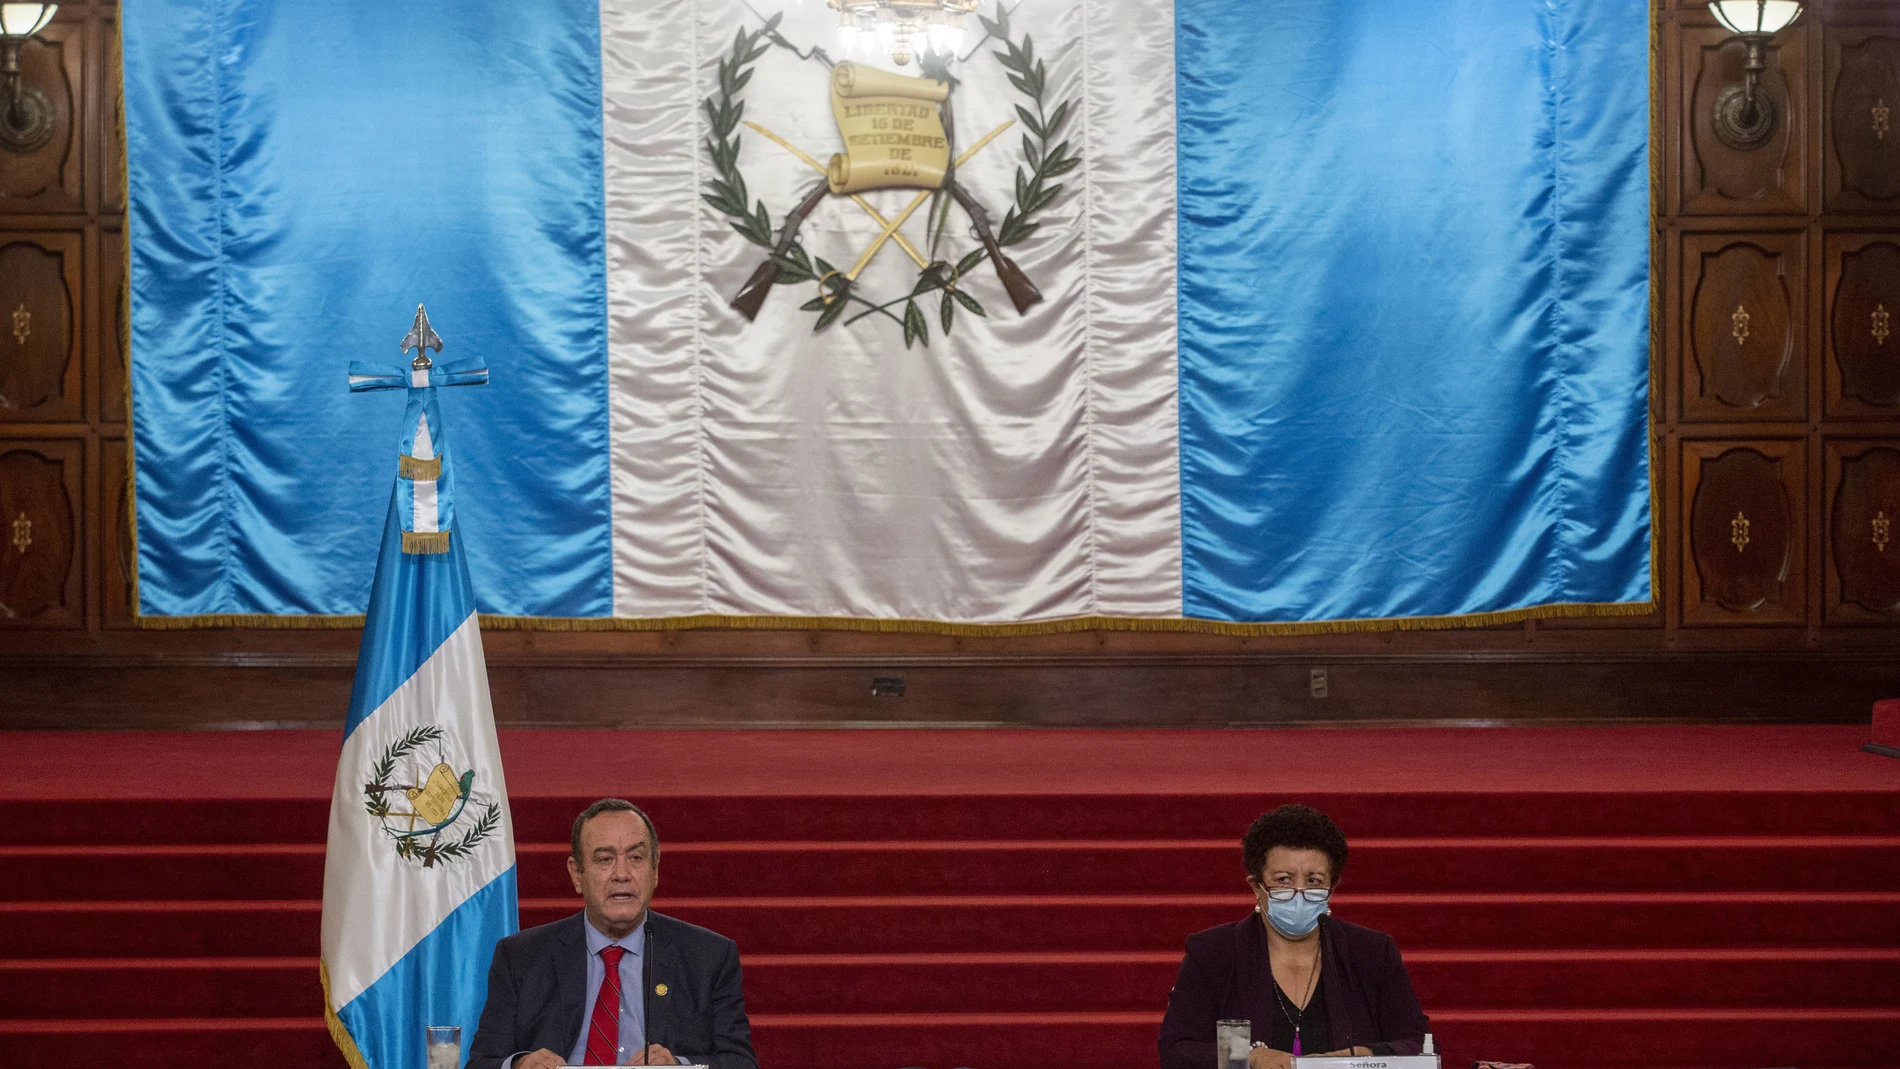 Guatemalan President Alejandro Giammattei, left, accompanied by Health minister Amelia Flores, speaks during a press conference at the National Palace in Guatemala City, Tuesday, July 27, 2021. The U.S. government has suspended cooperation with Guatemala's Attorney General's Office in response to the firing of its top anti-corruption prosecutor Juan Francisco Sandoval according to U.S. State Department. (AP Photo/Oliver de Ros)